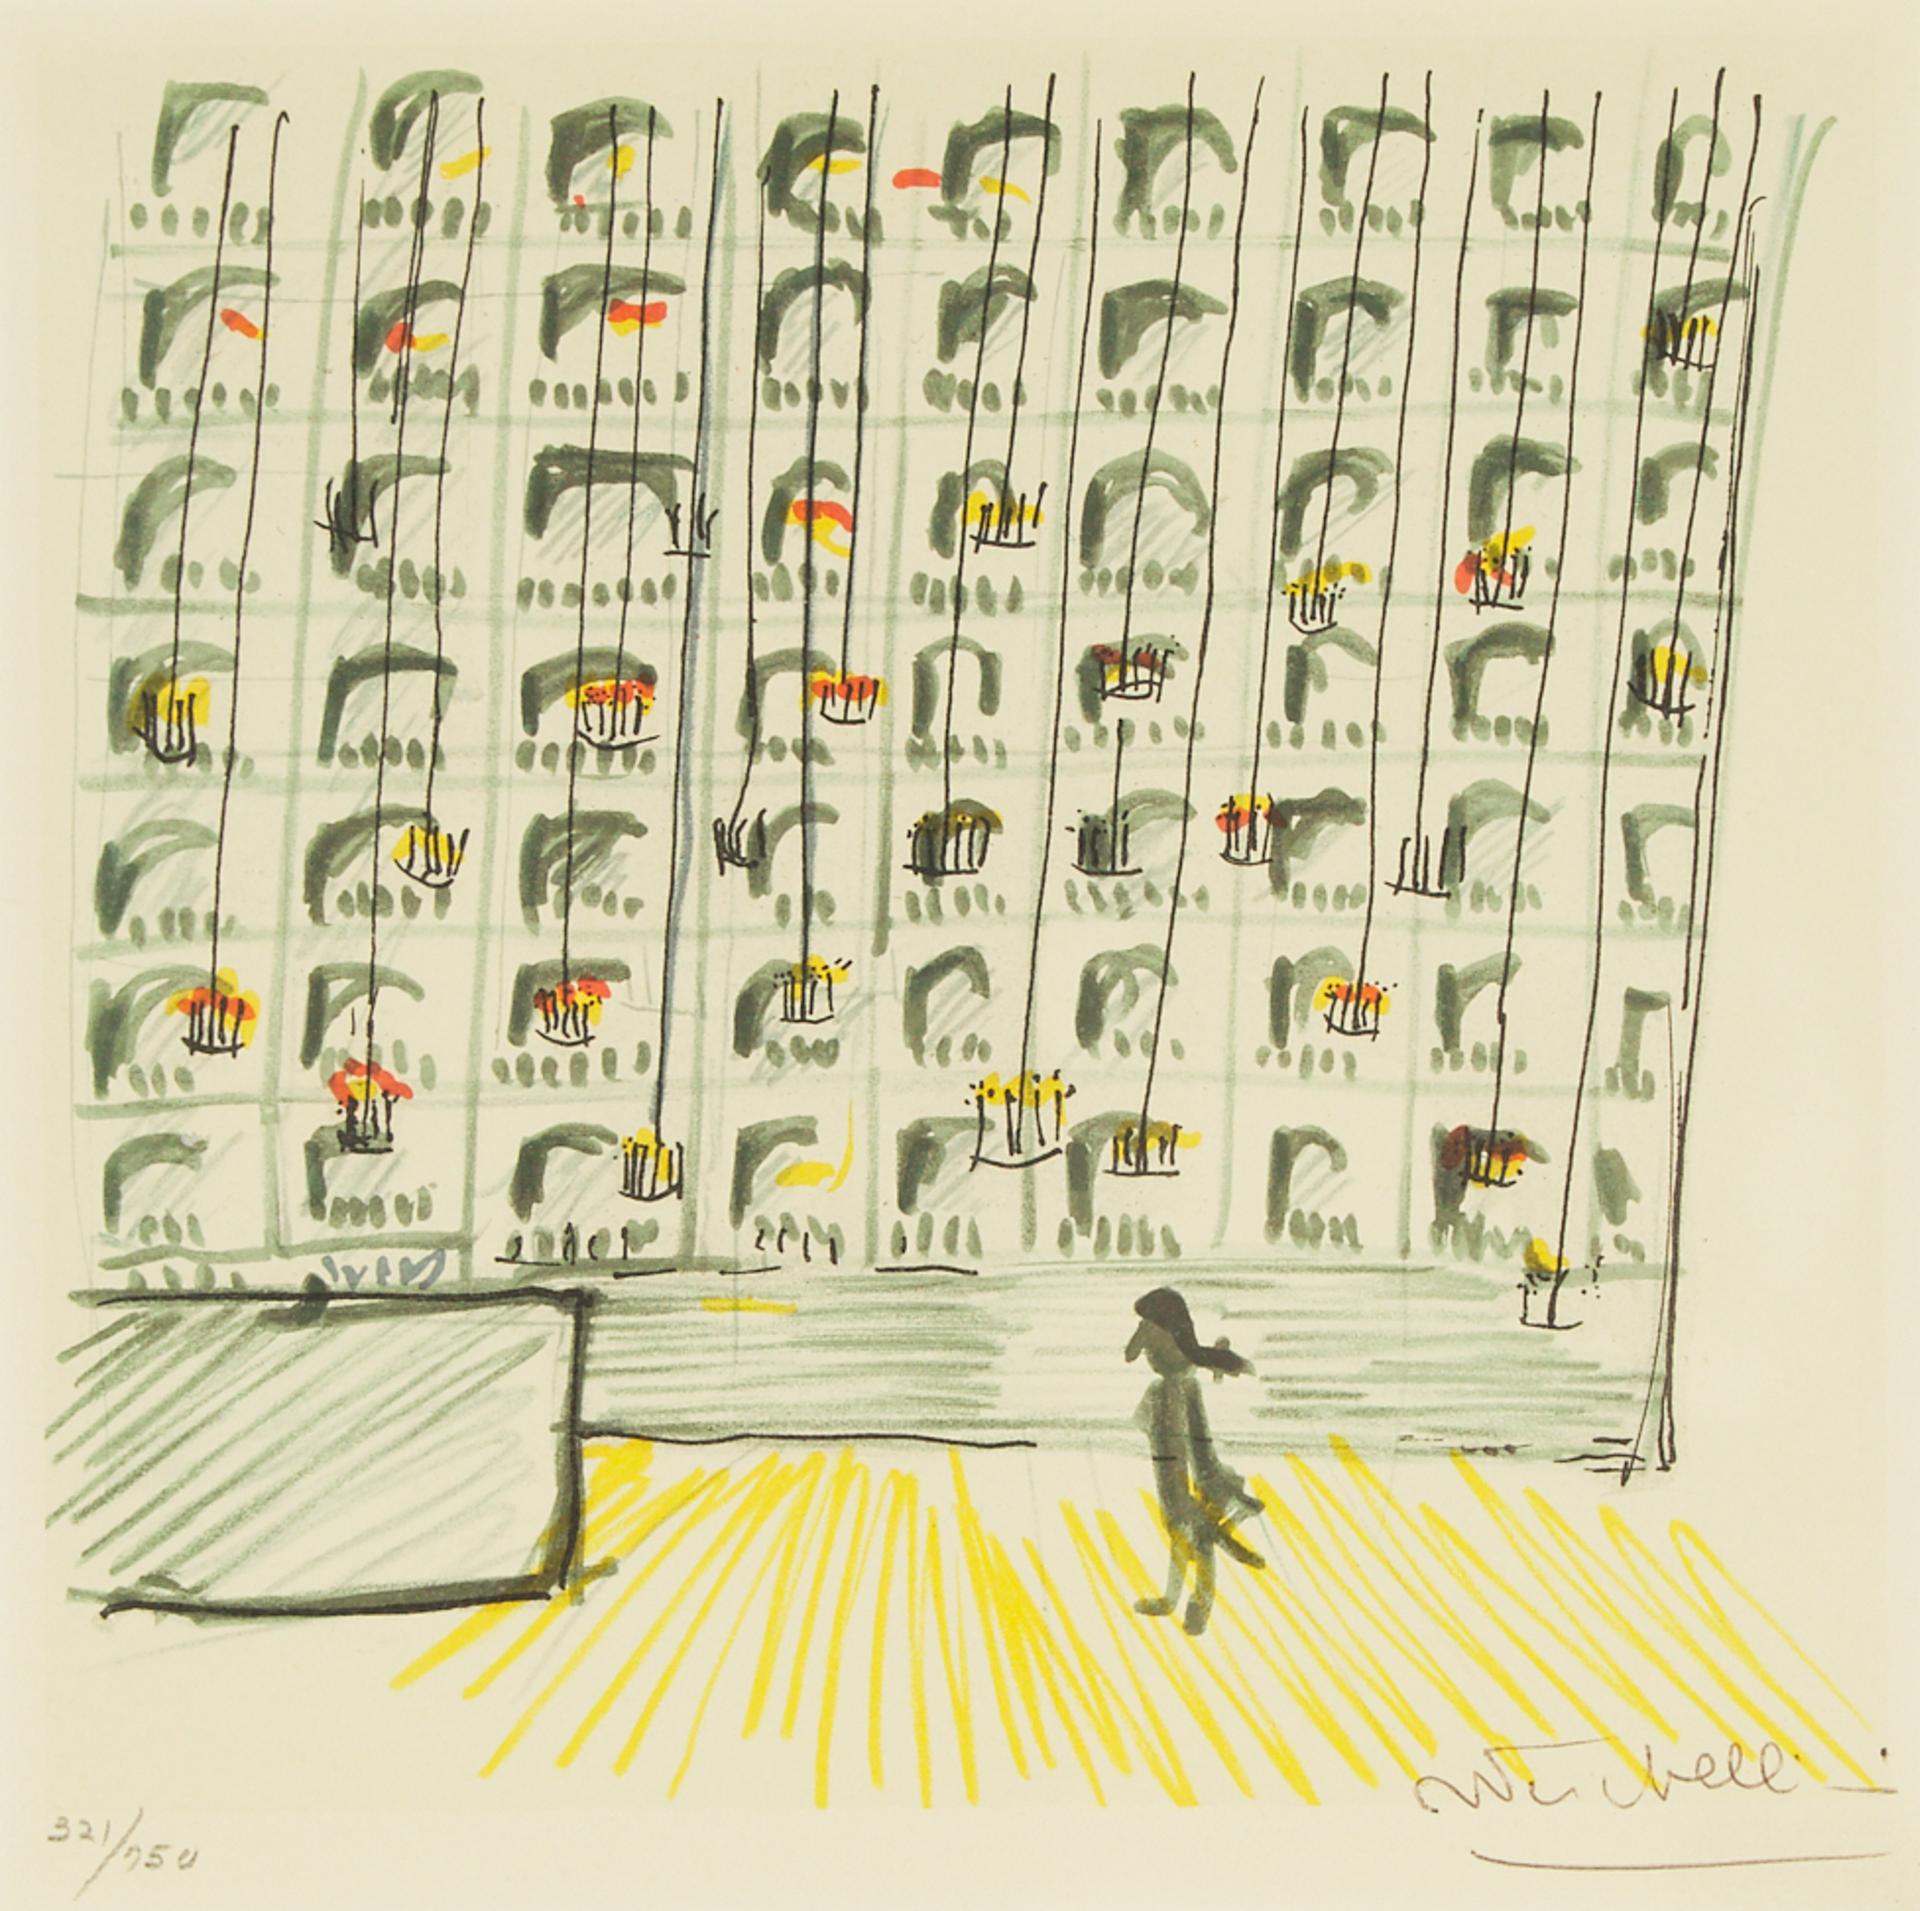 Frederico Fellini - Il Casanova - Ii Teatro Di Dresda (Flag Series), After The Drawing Of 1976, Printed Later By The World Federation Of United Nations Associations In 1986